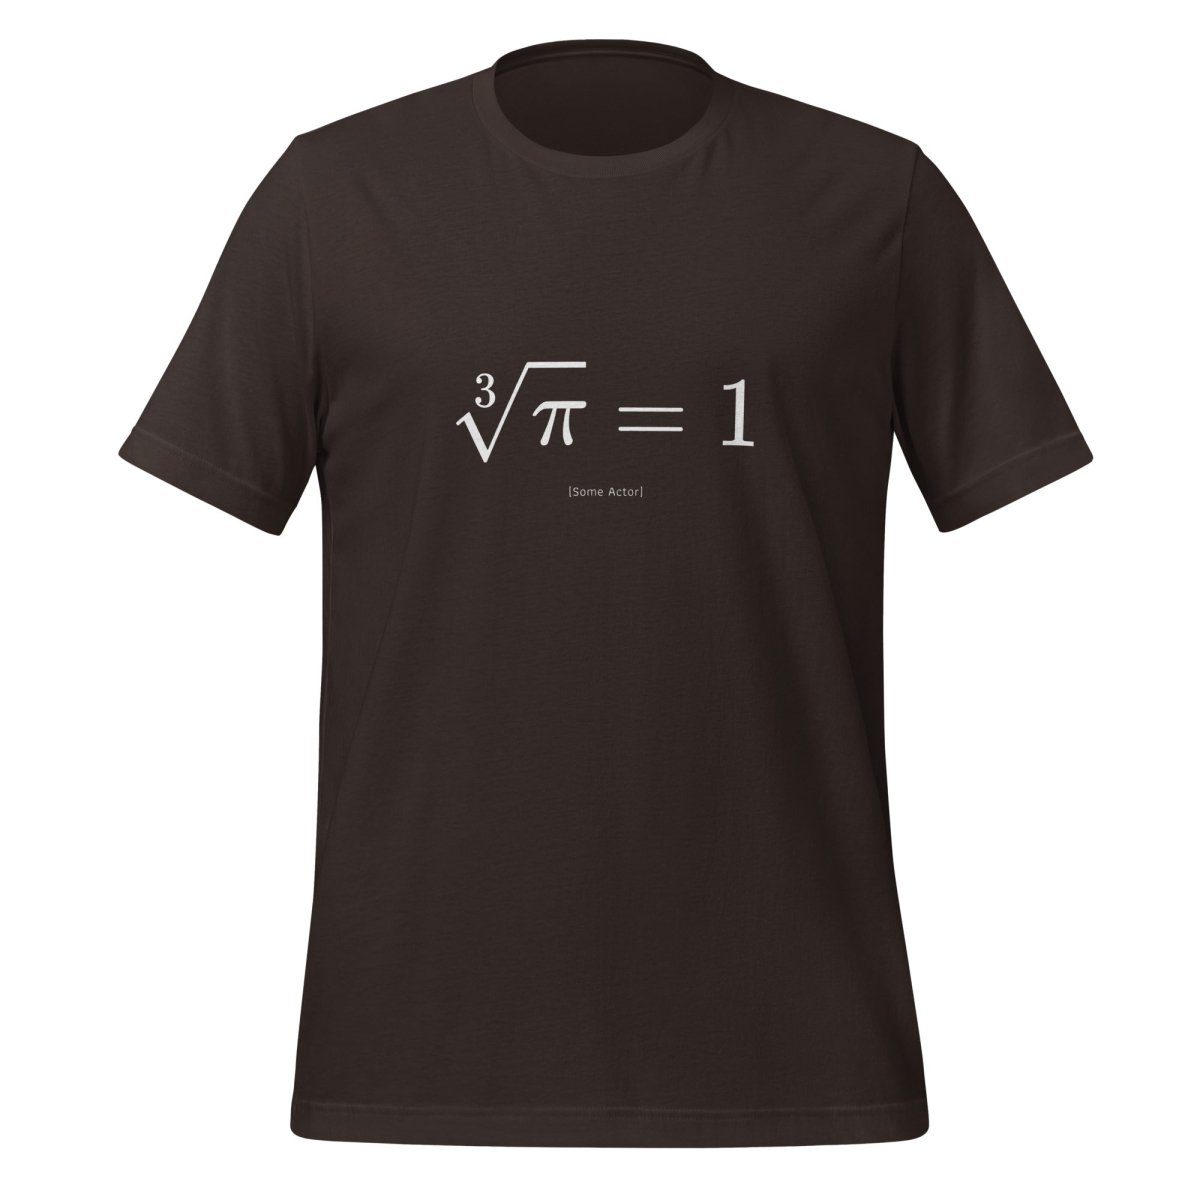 The Cube Root of Pi Equals 1 T - Shirt (unisex) - Brown - AI Store